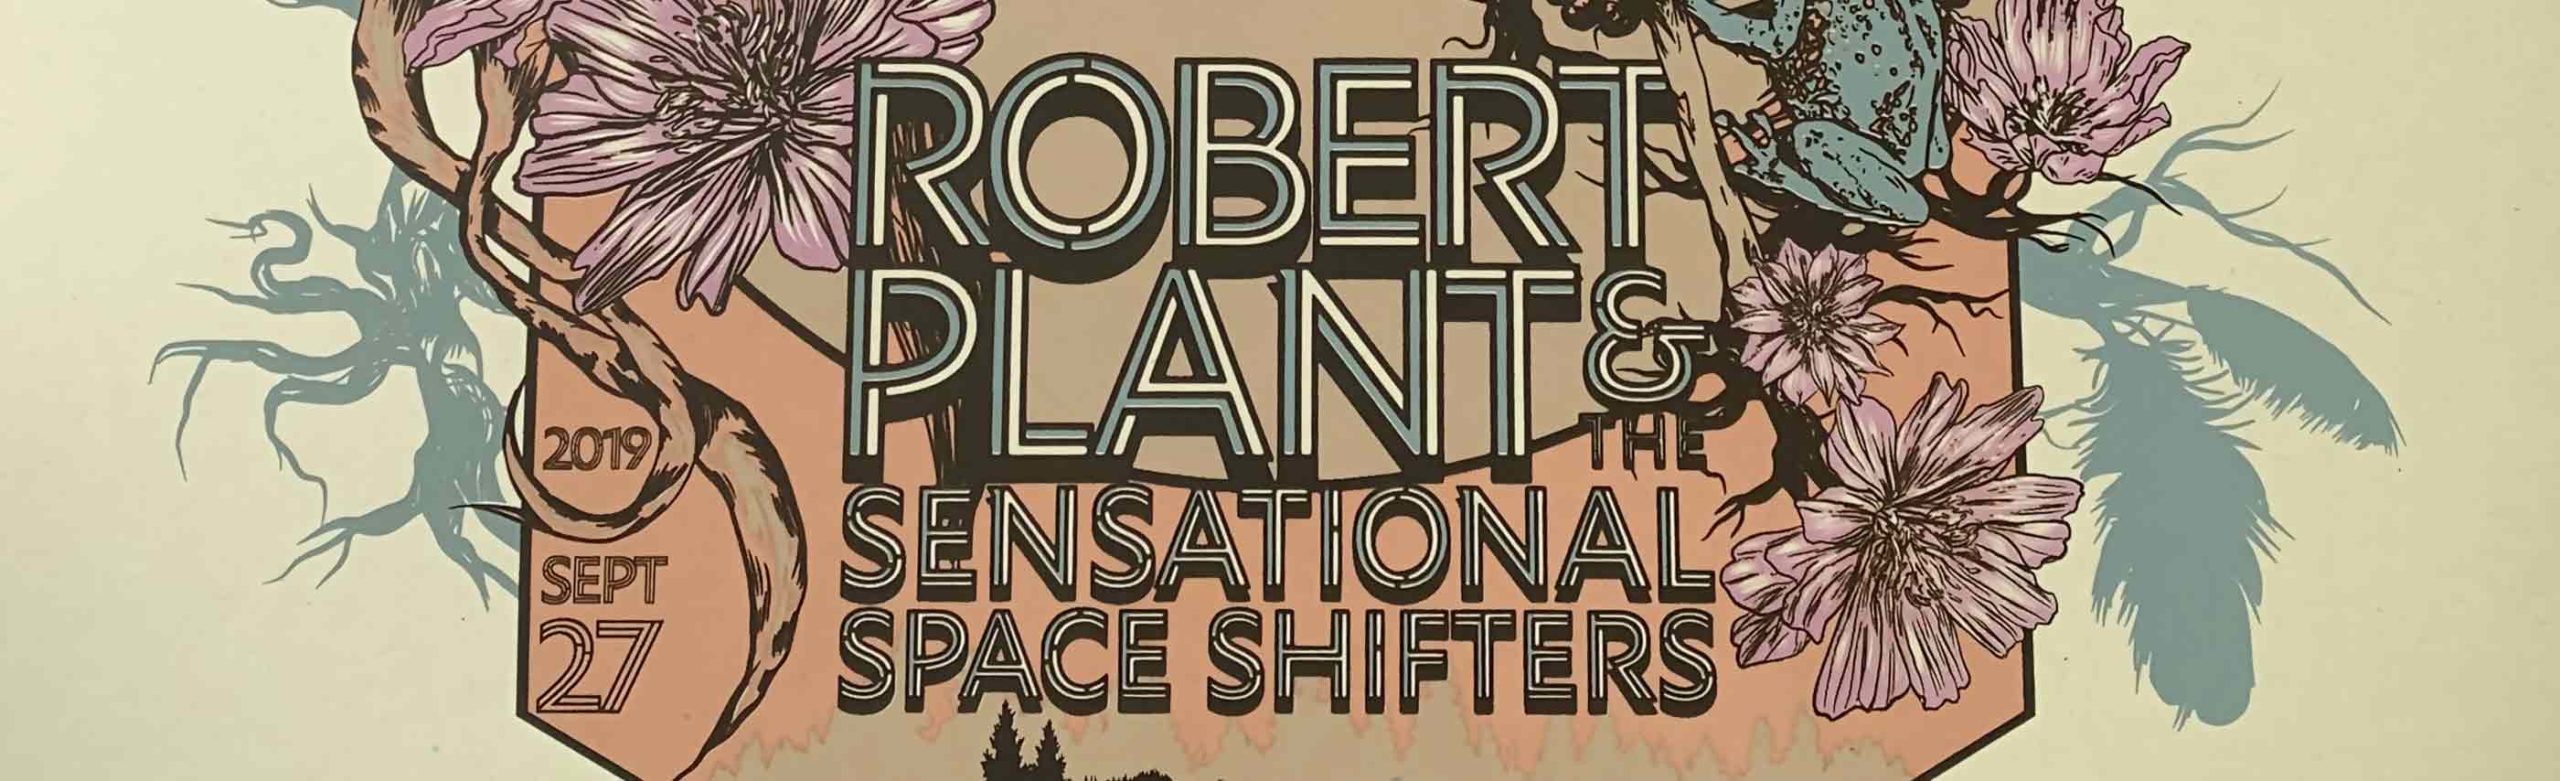 Limited Edition Screenprints for Robert Plant and The Sensational Space Shifters at KettleHouse Amphitheater Image